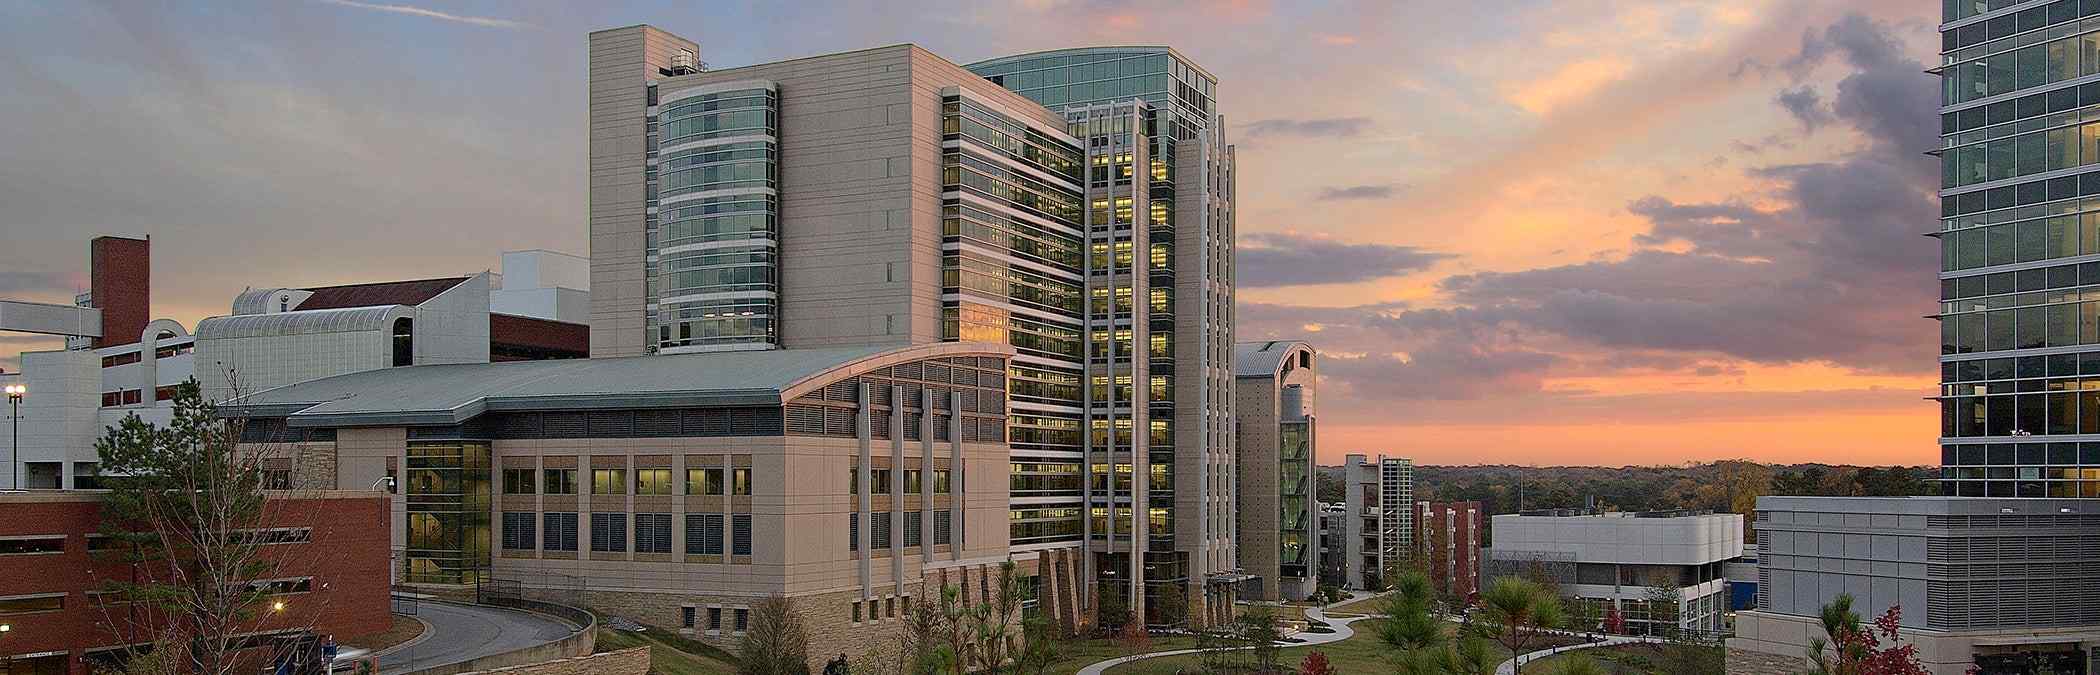 US Disease Control and Prevention, Emerging Infectious Diseases Laboratory, Atlanta